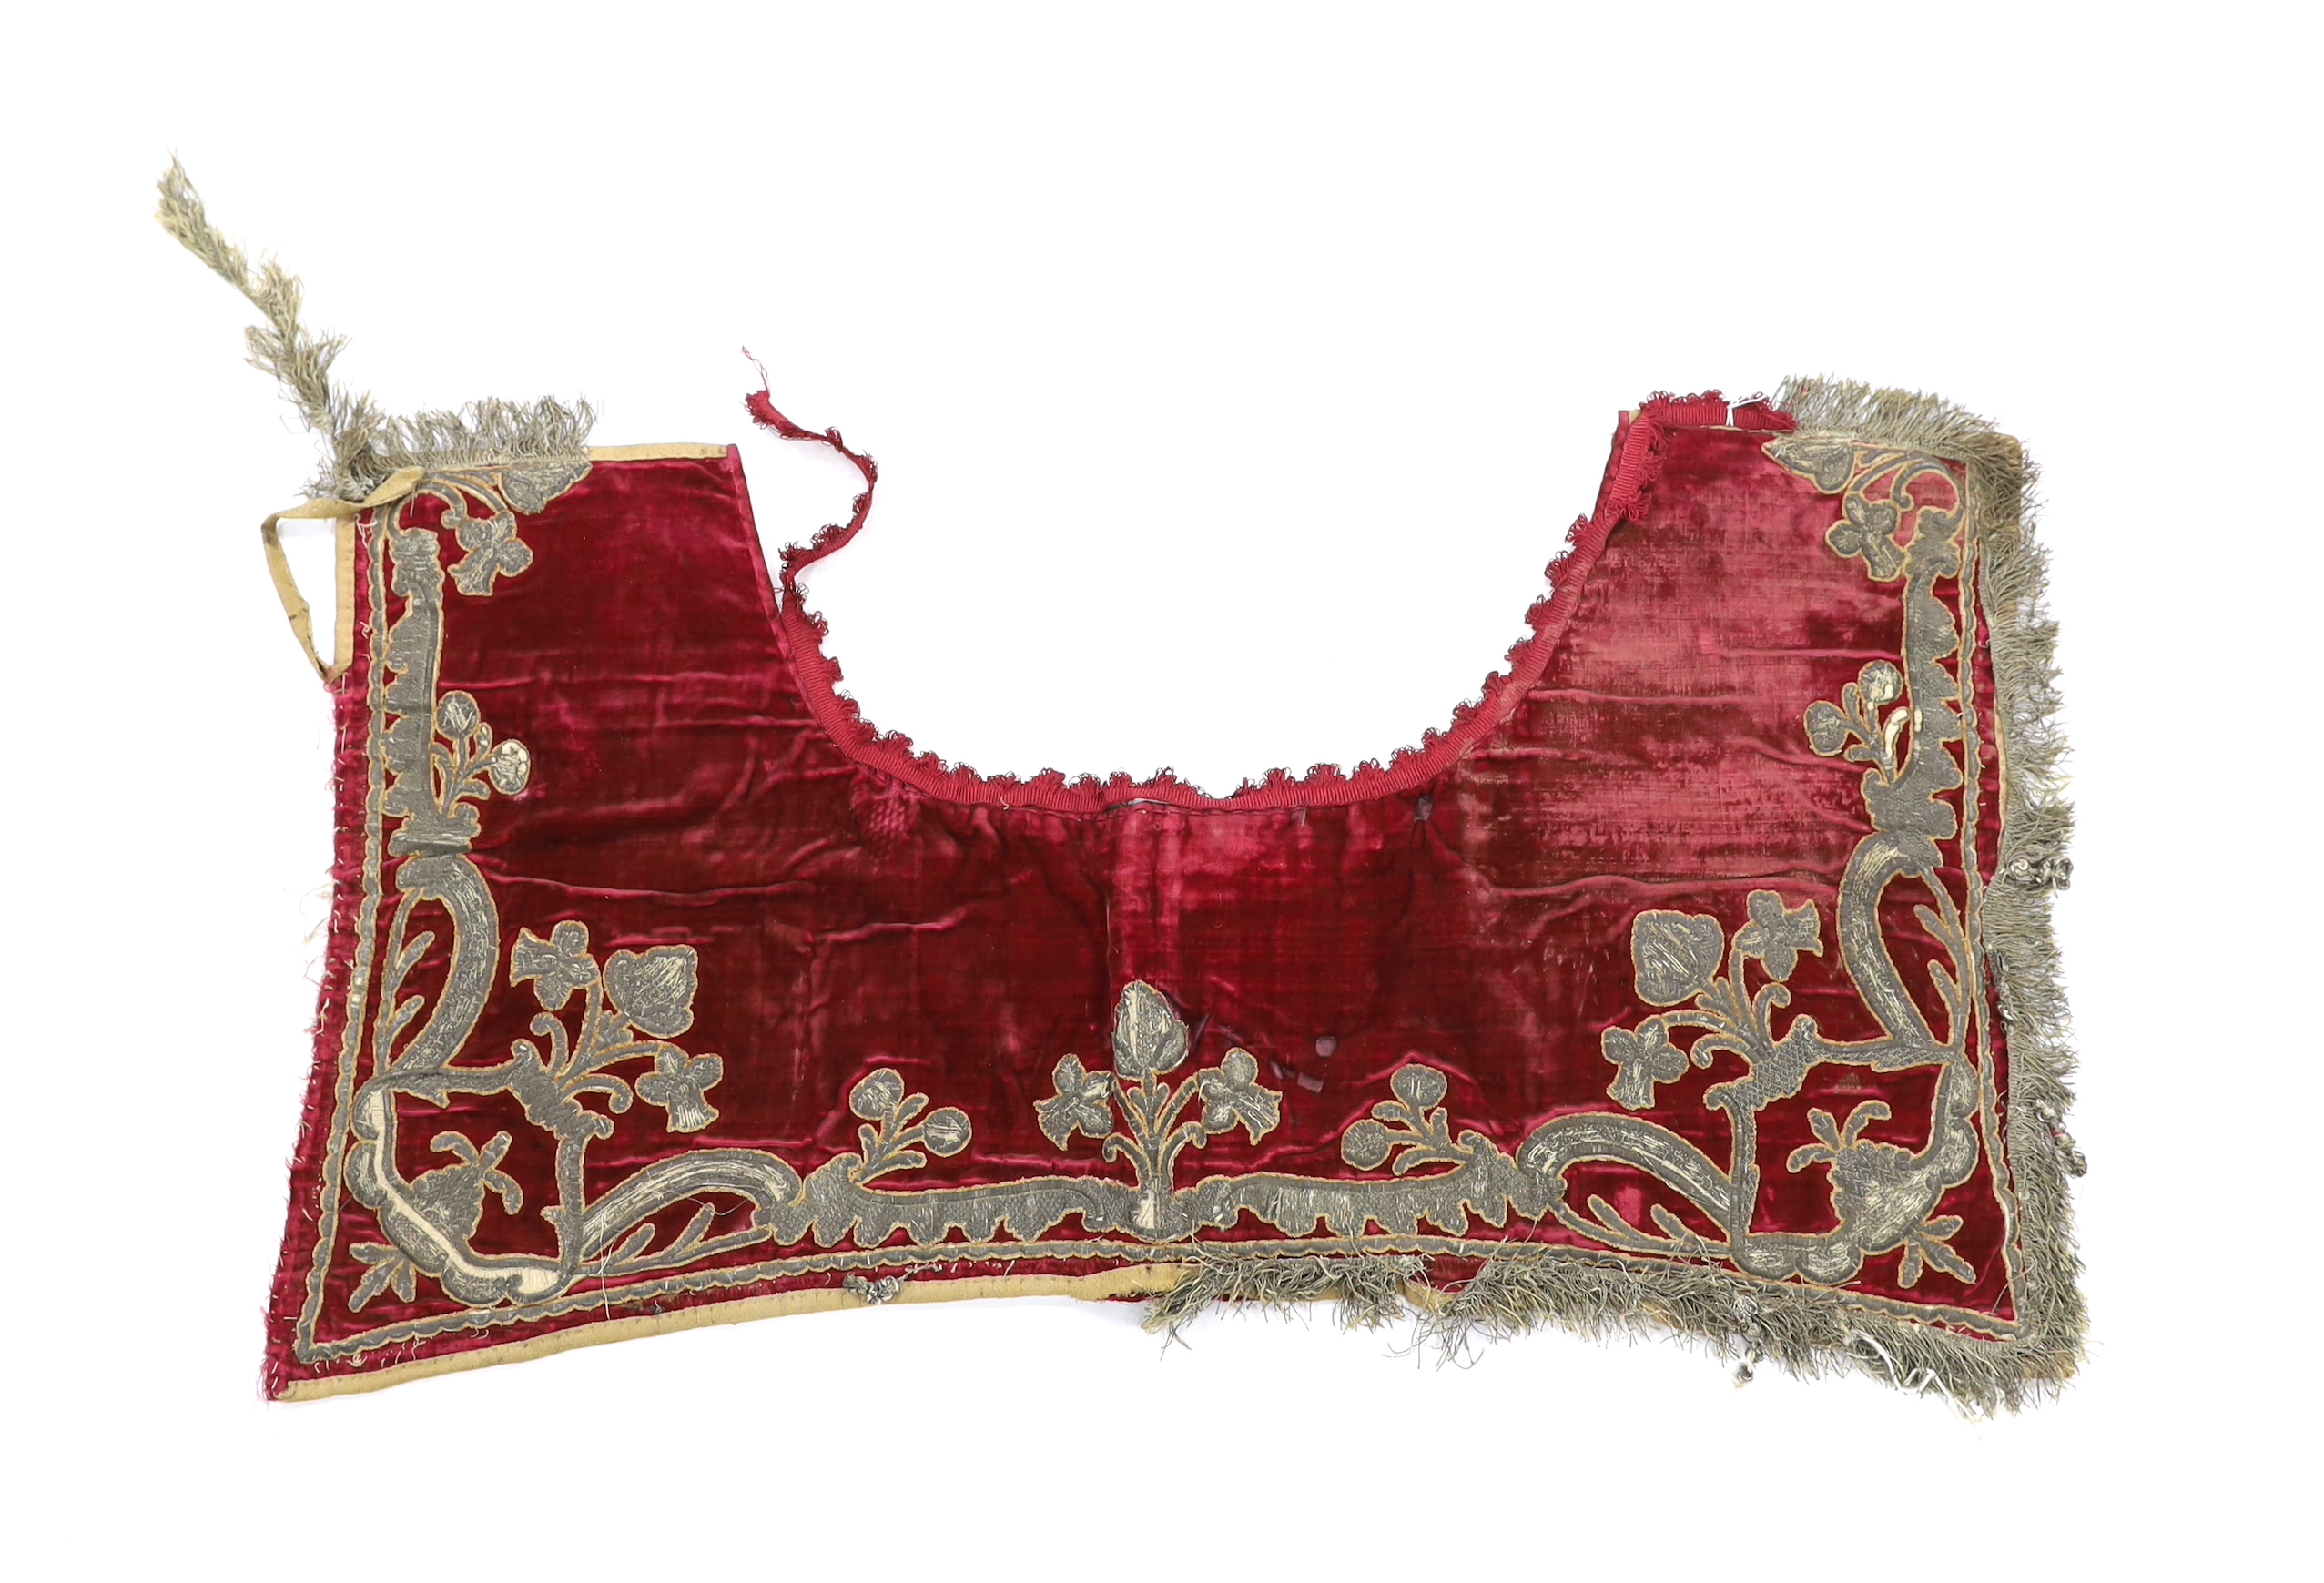 A burgundy velvet and silver thread embroidered and fringed saddle blanket, possibly Italian or Spanish, circa late 18th century, 94cm long x 50cm deep